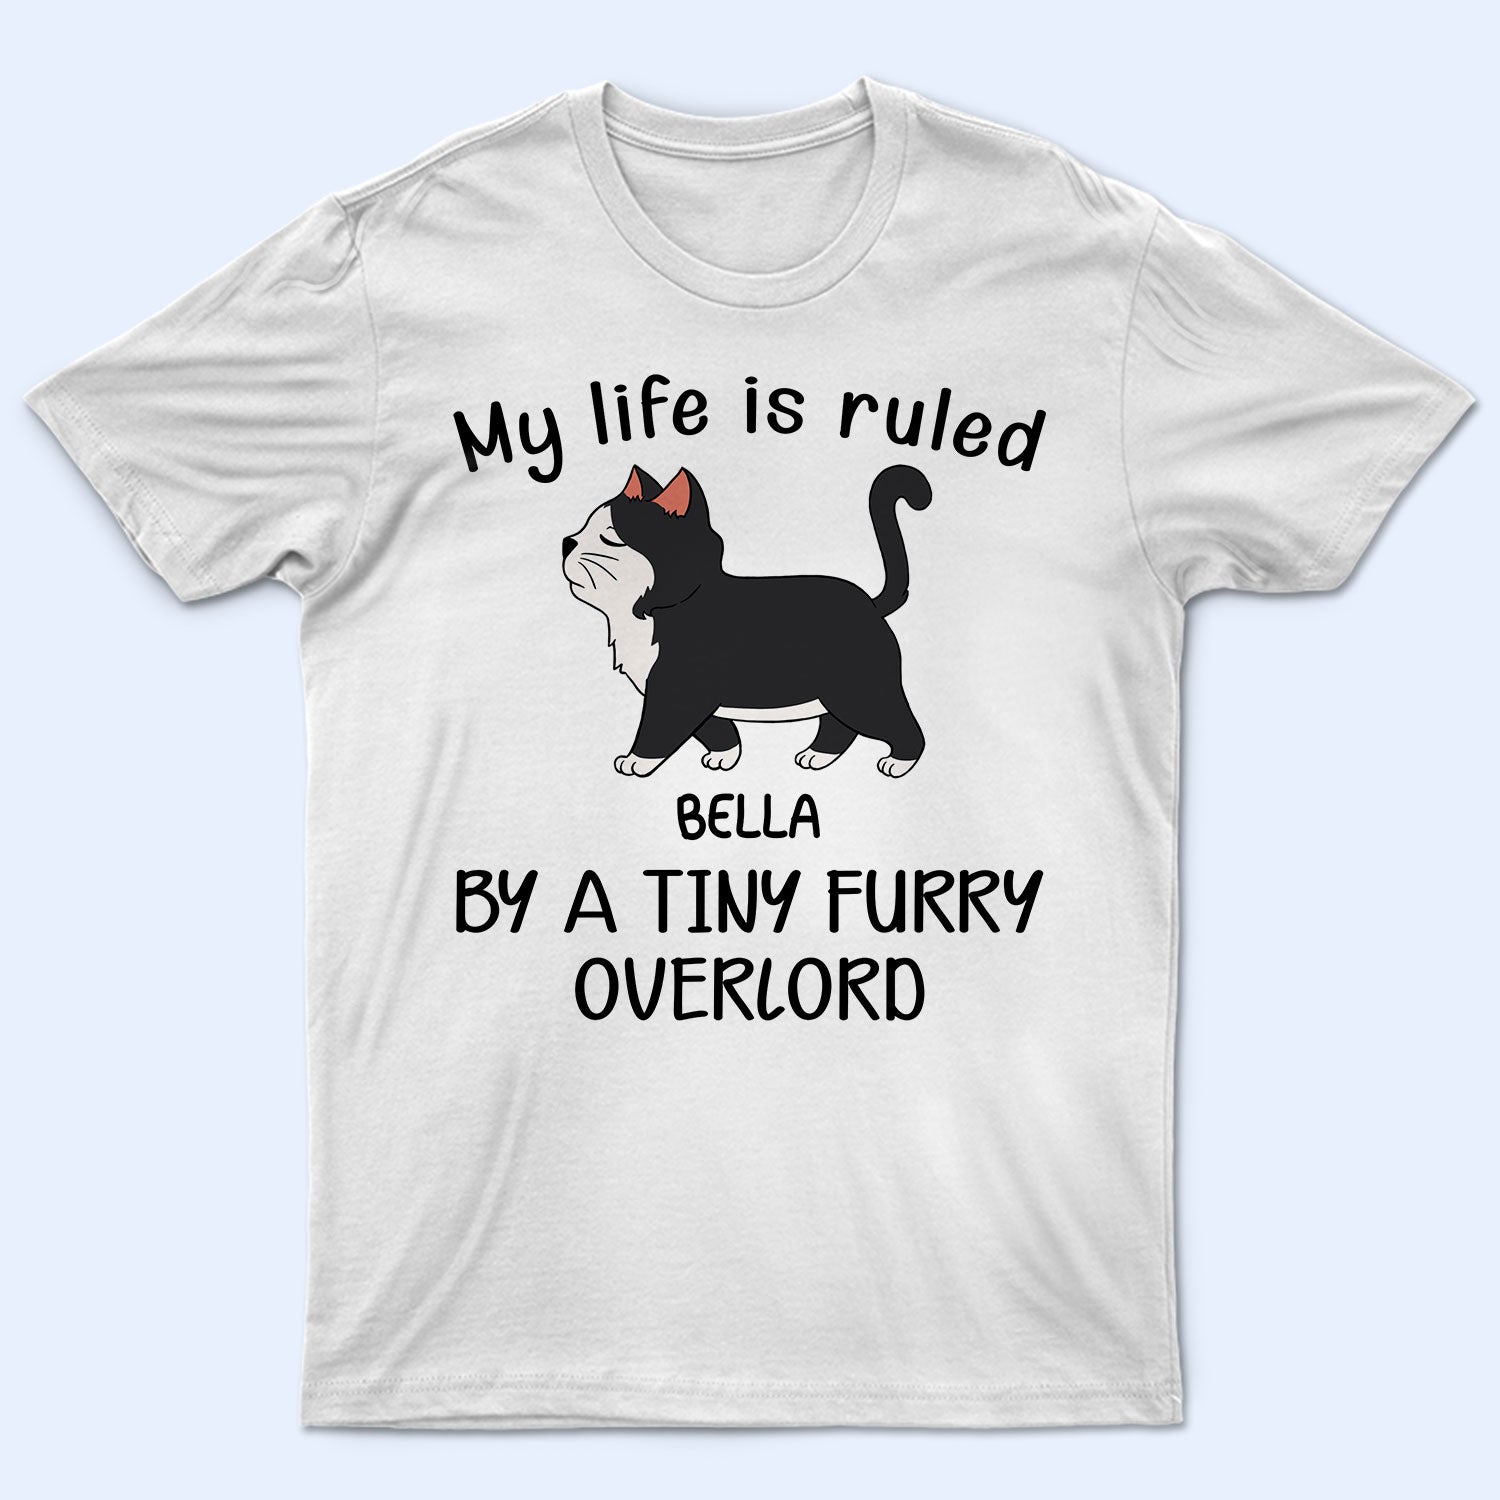 My Life Is Ruled By A Tiny Furry Overlord - Gift For Cat Lovers, Cat Mom, Cat Dad - Personalized T Shirt